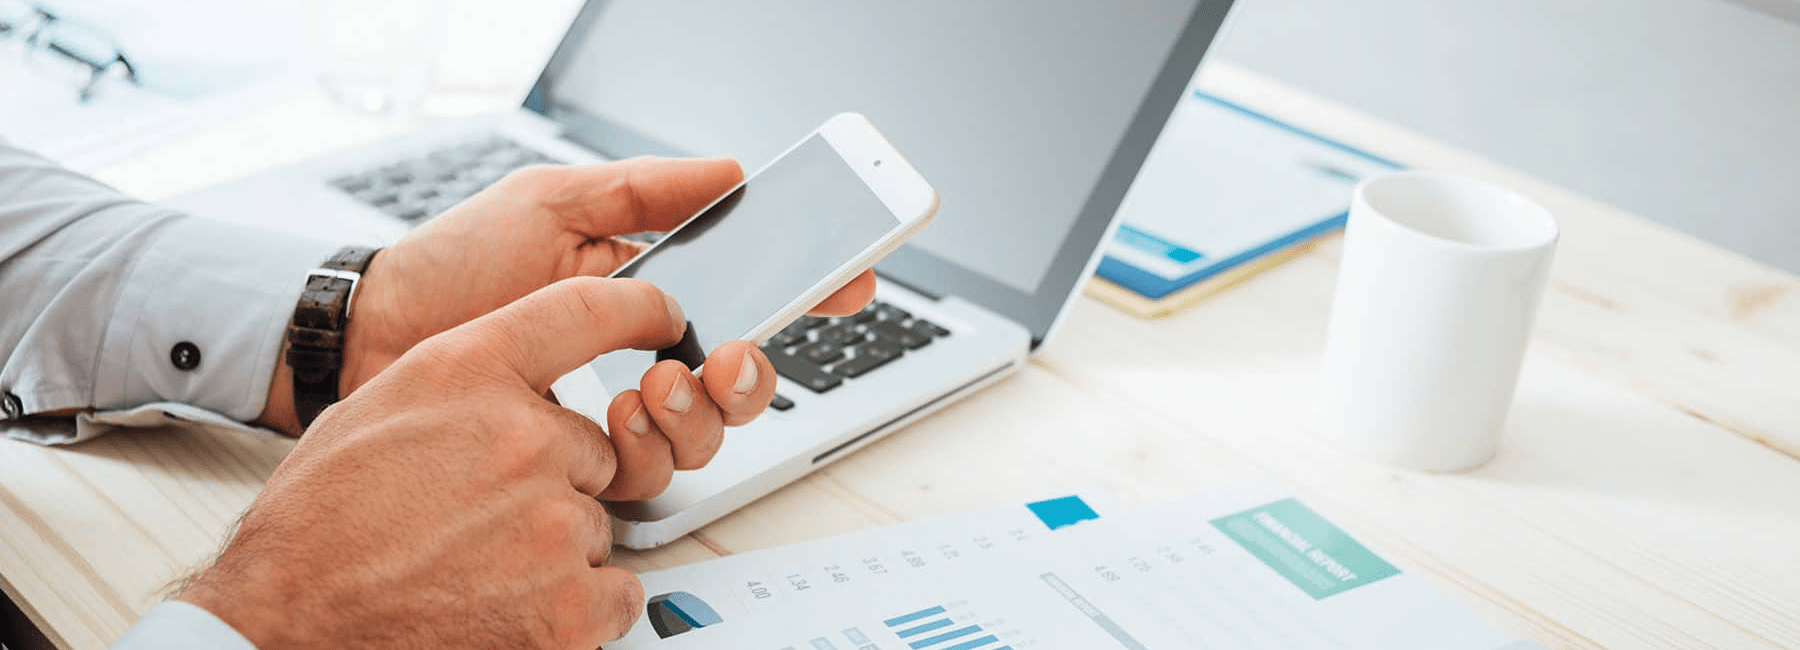 man-using-phone-laptop-to-calculate-finances